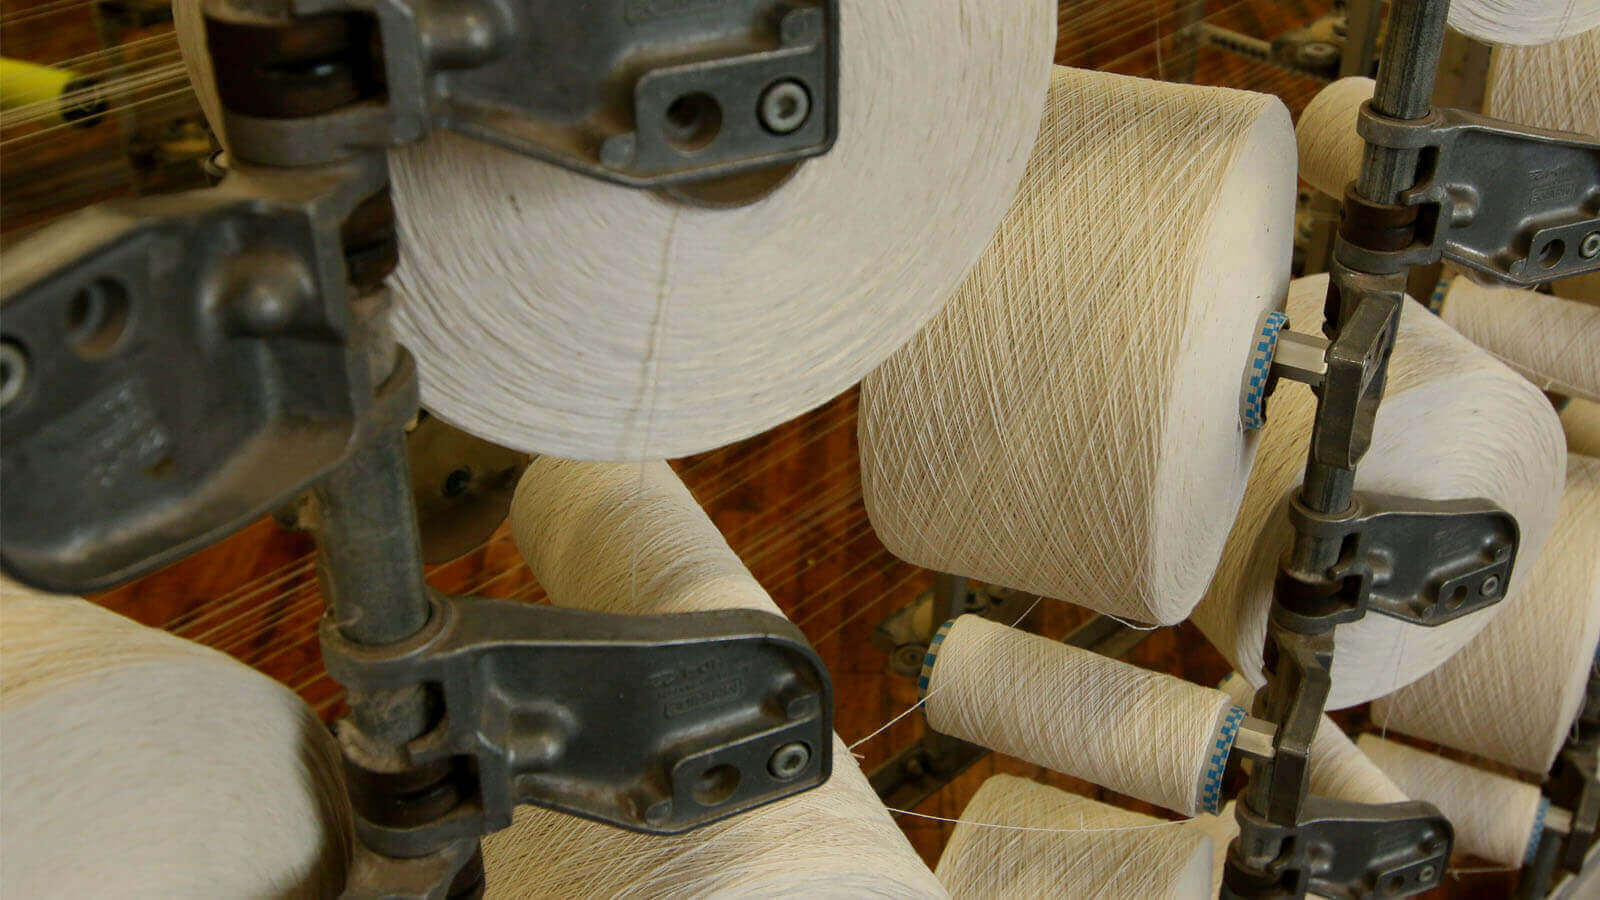 Close-up of several spools of tan thread ready to be used inside the Wayne Mills facility